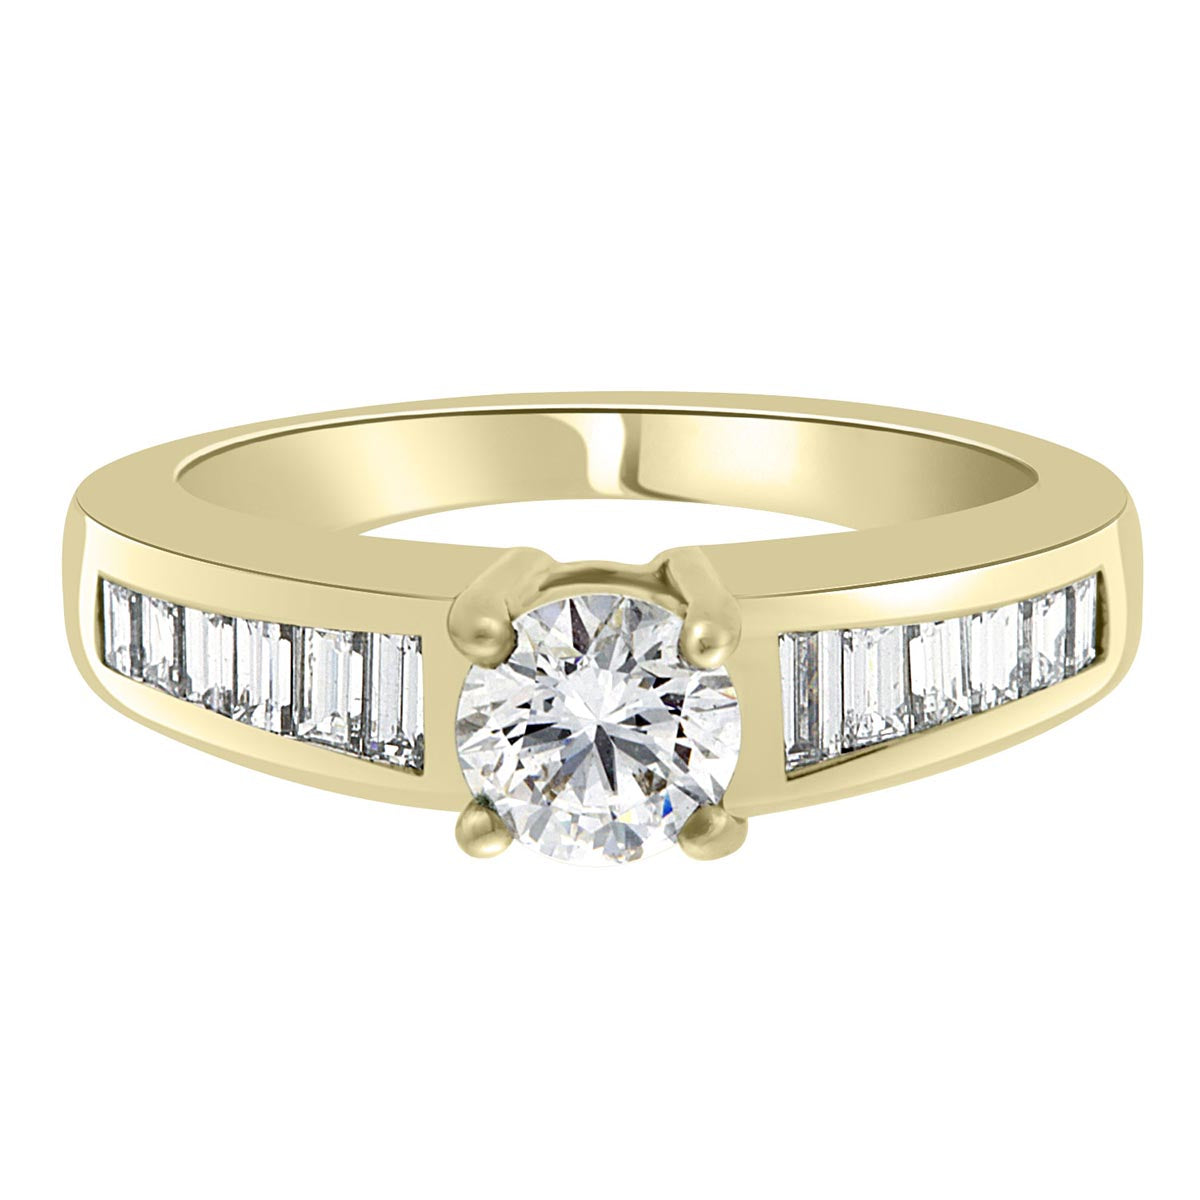 Baguette Diamond Ring made from Yellow gold